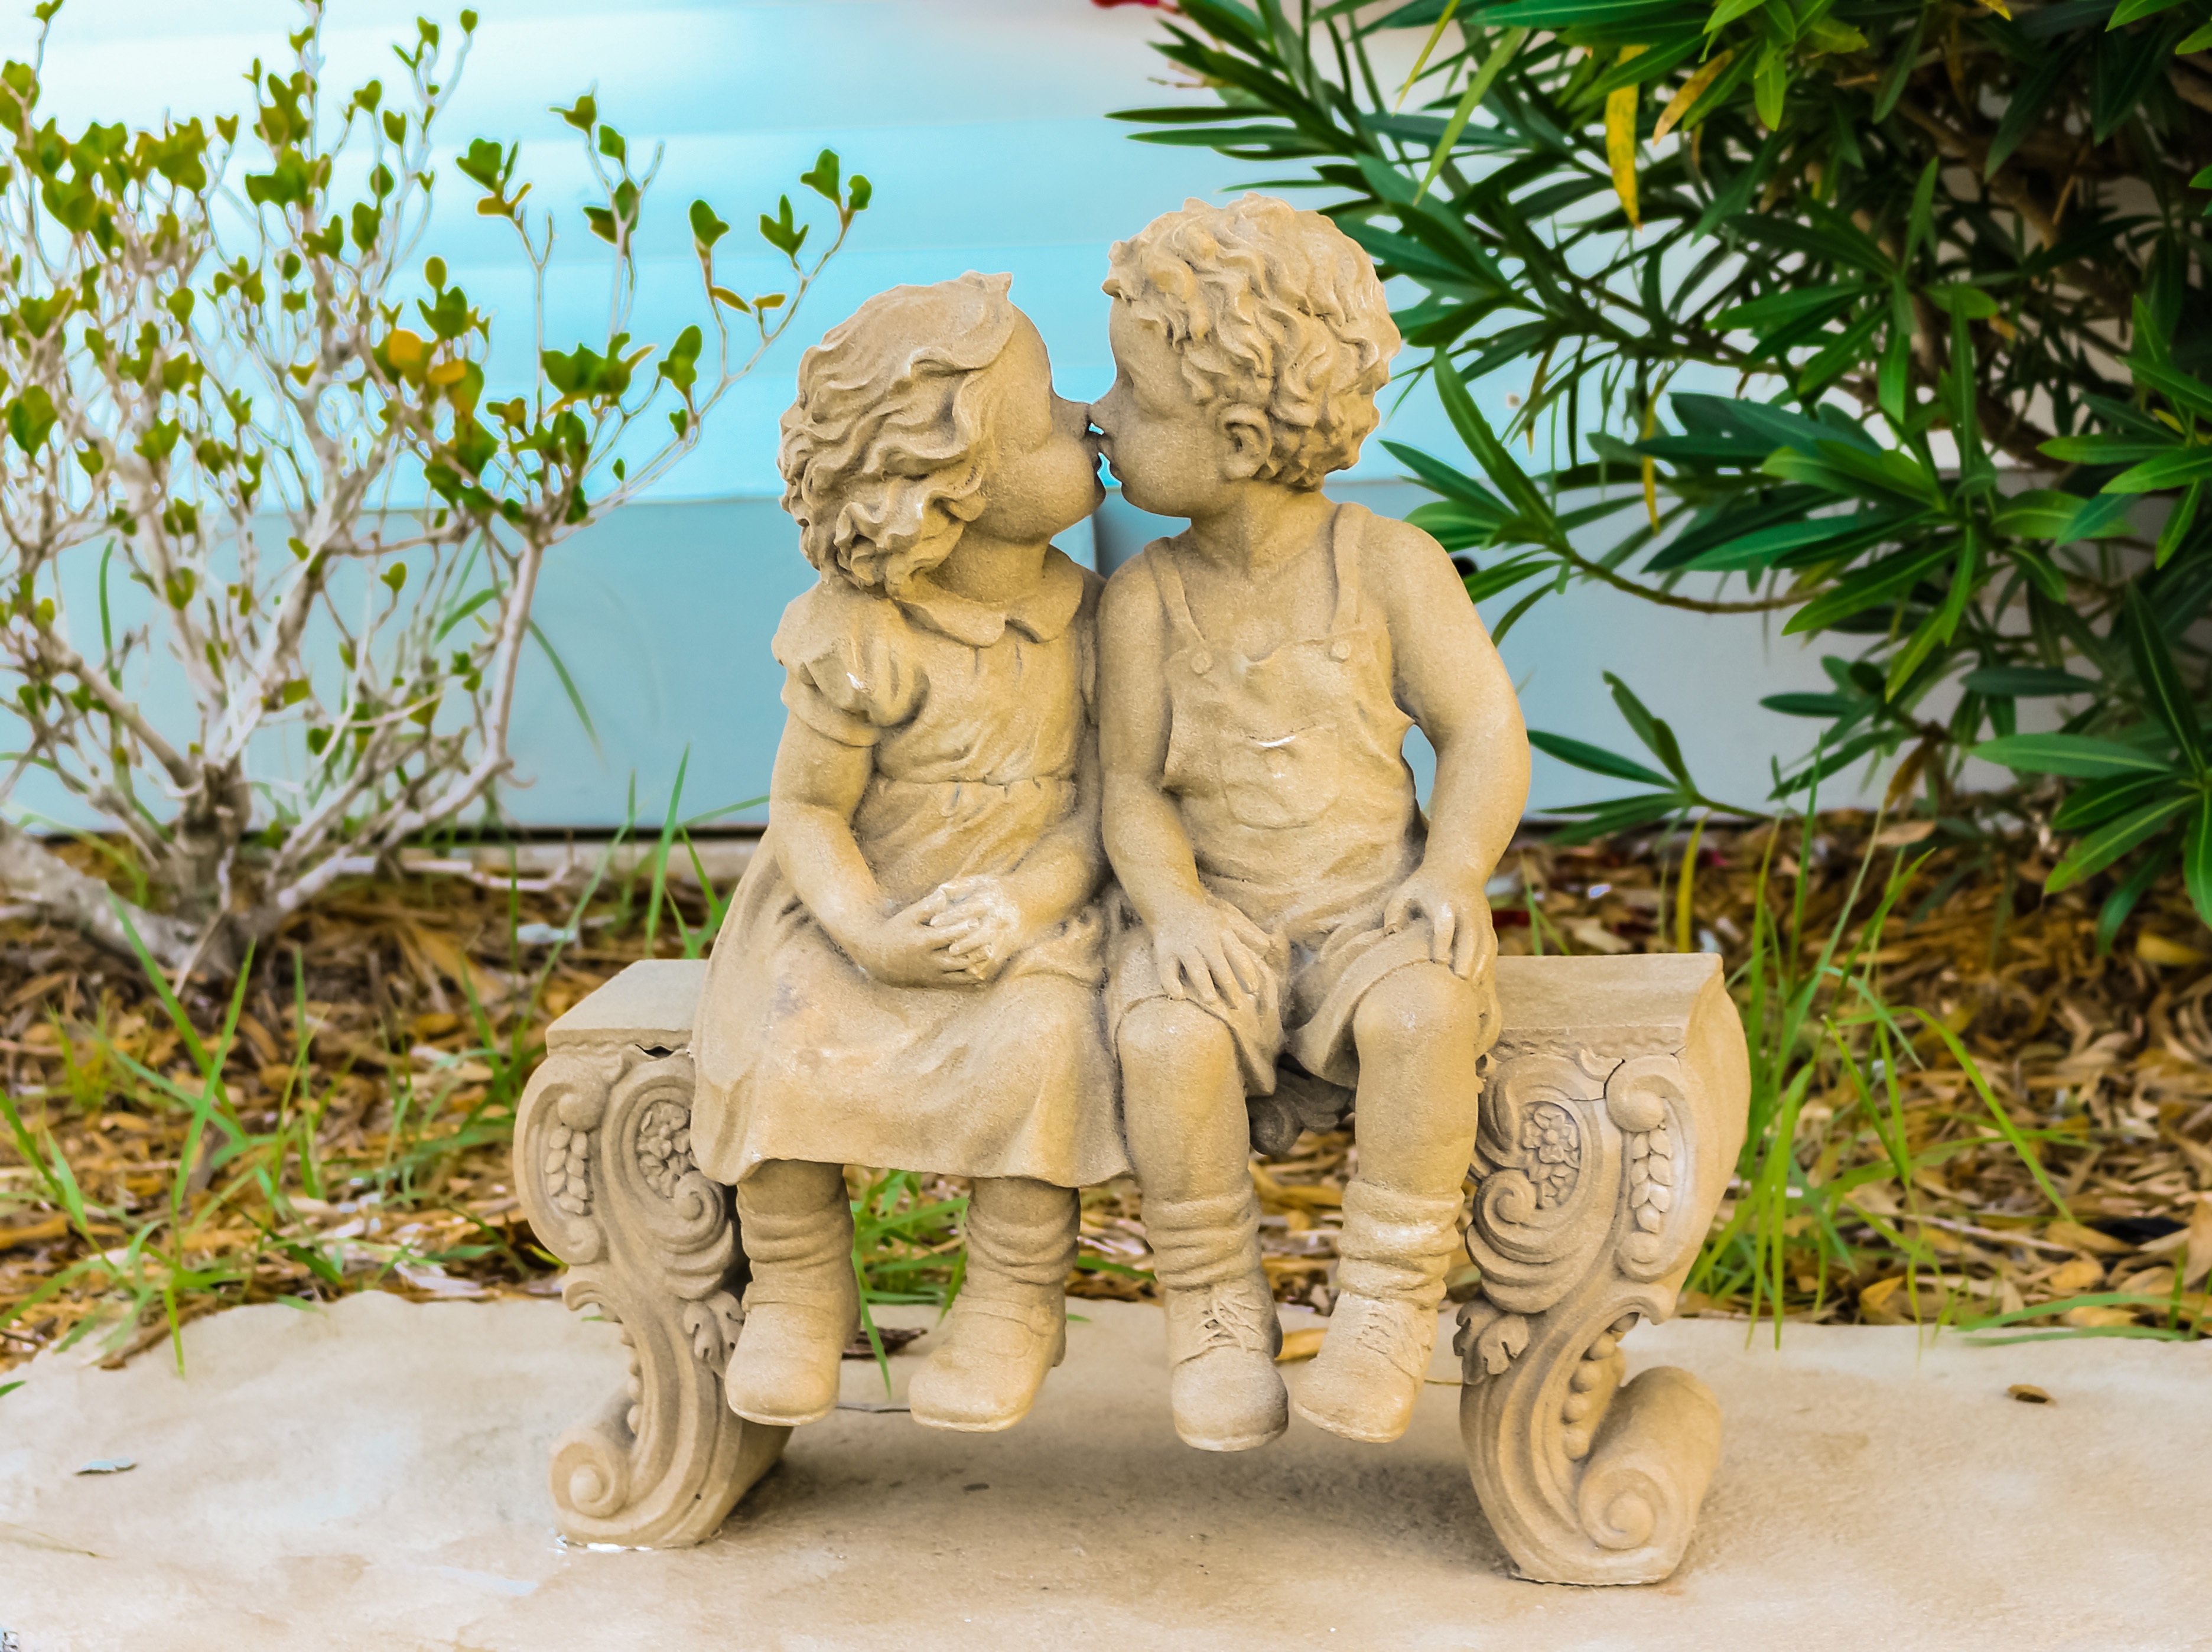 A garden statue of a boy and girl kissing by Abdecoral